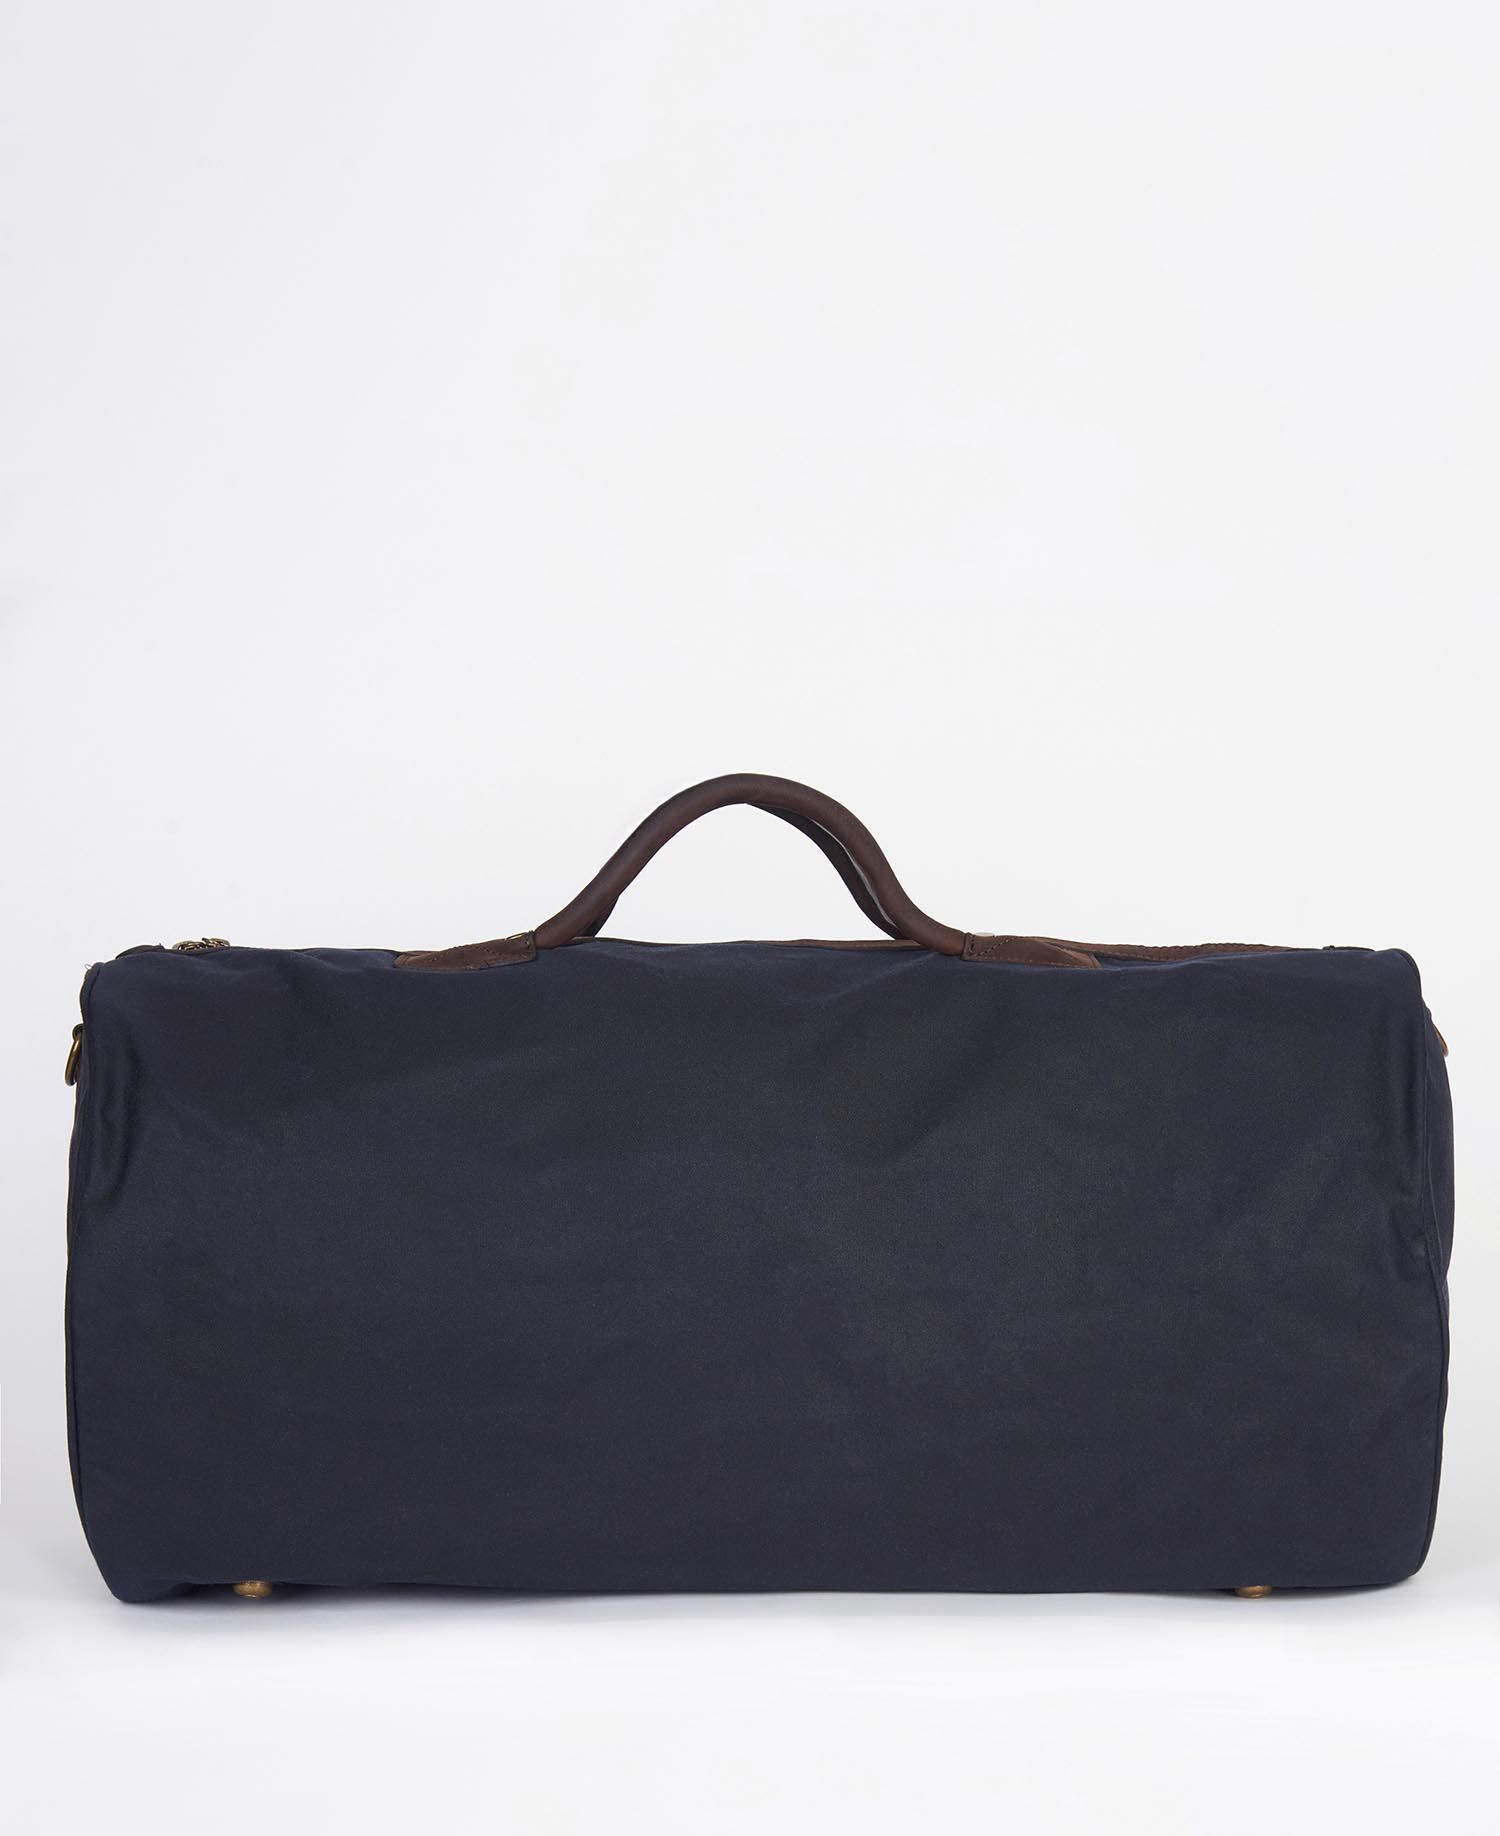 Barbour Wax Holdall in Navy | Barbour